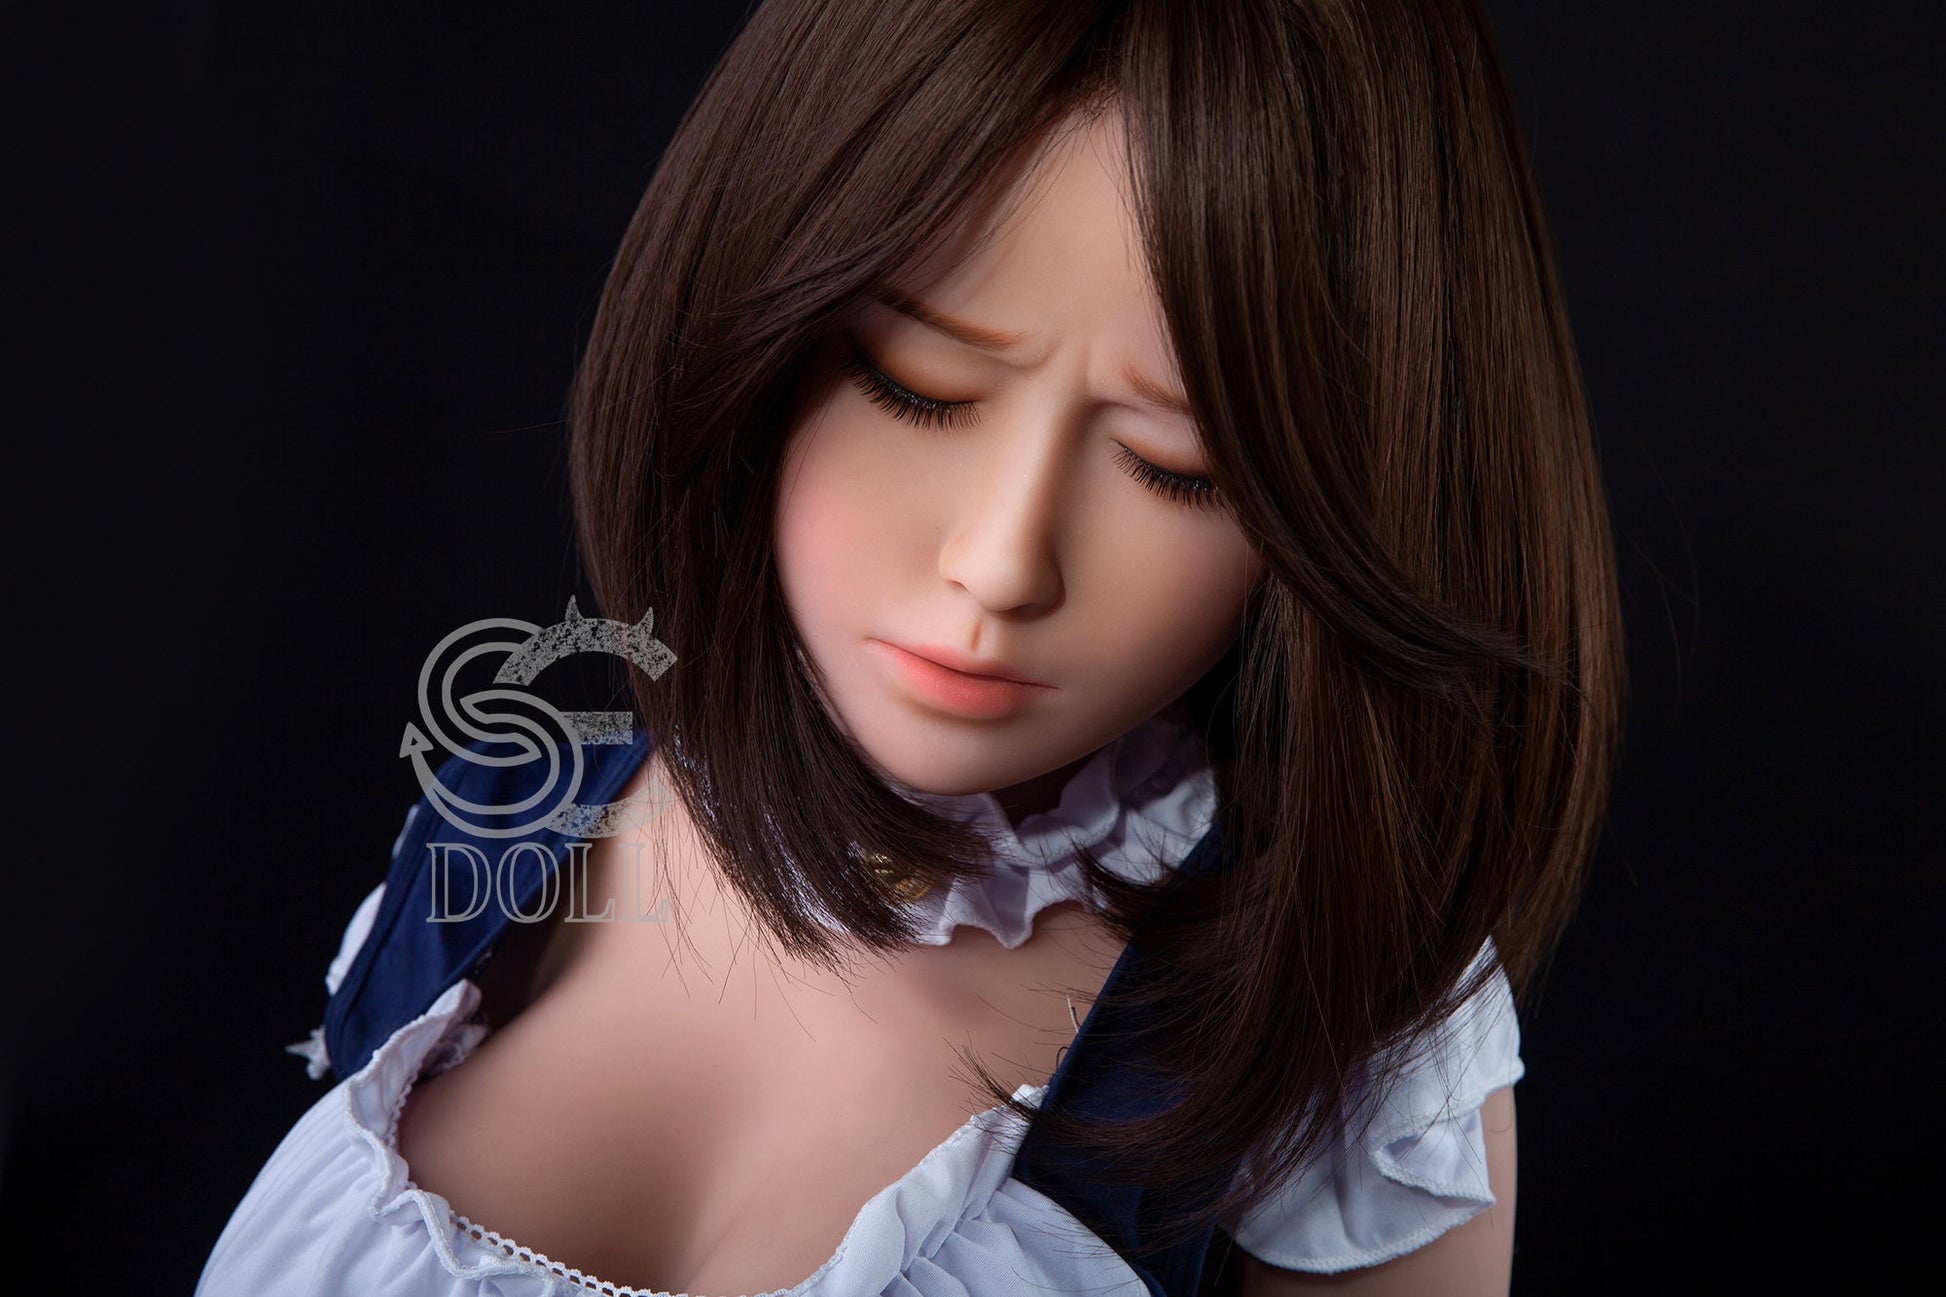 SE Doll - 151 cm E Cup TPE Doll - Lilith (4ft 11in) - Love Dolls 4U